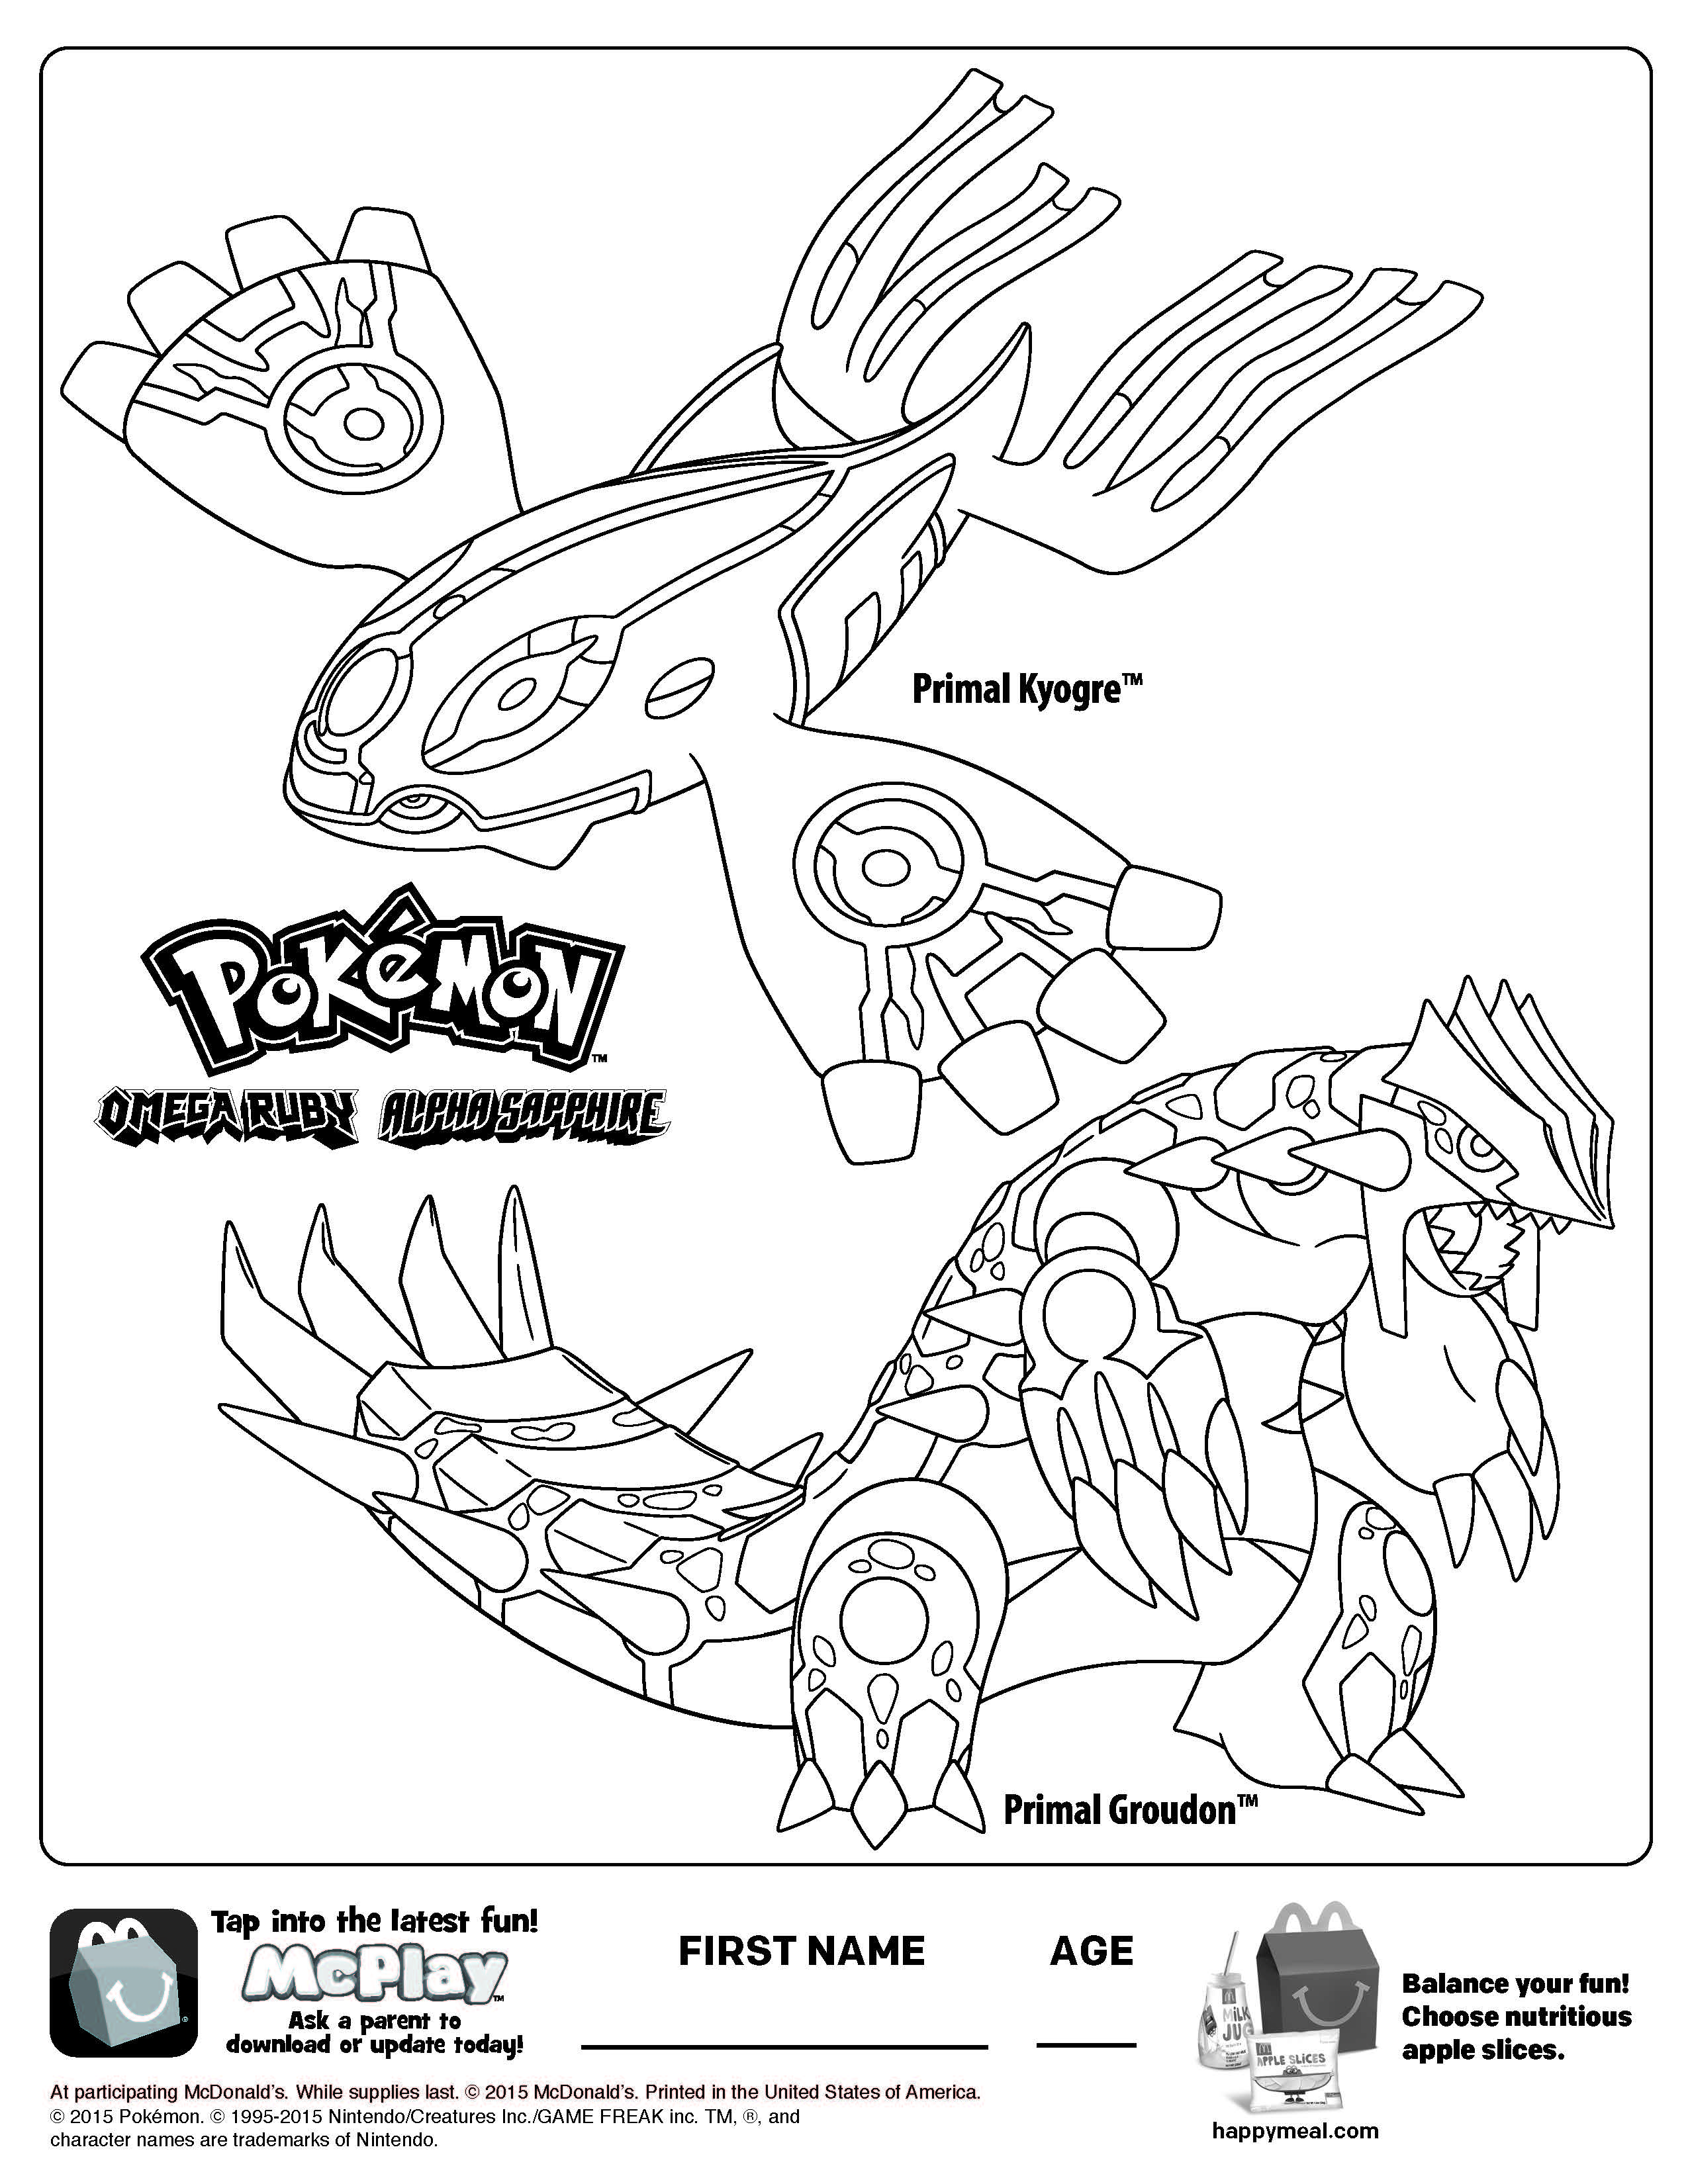 Free McDonalds Happy Meal Pokemon Printable Coloring Page